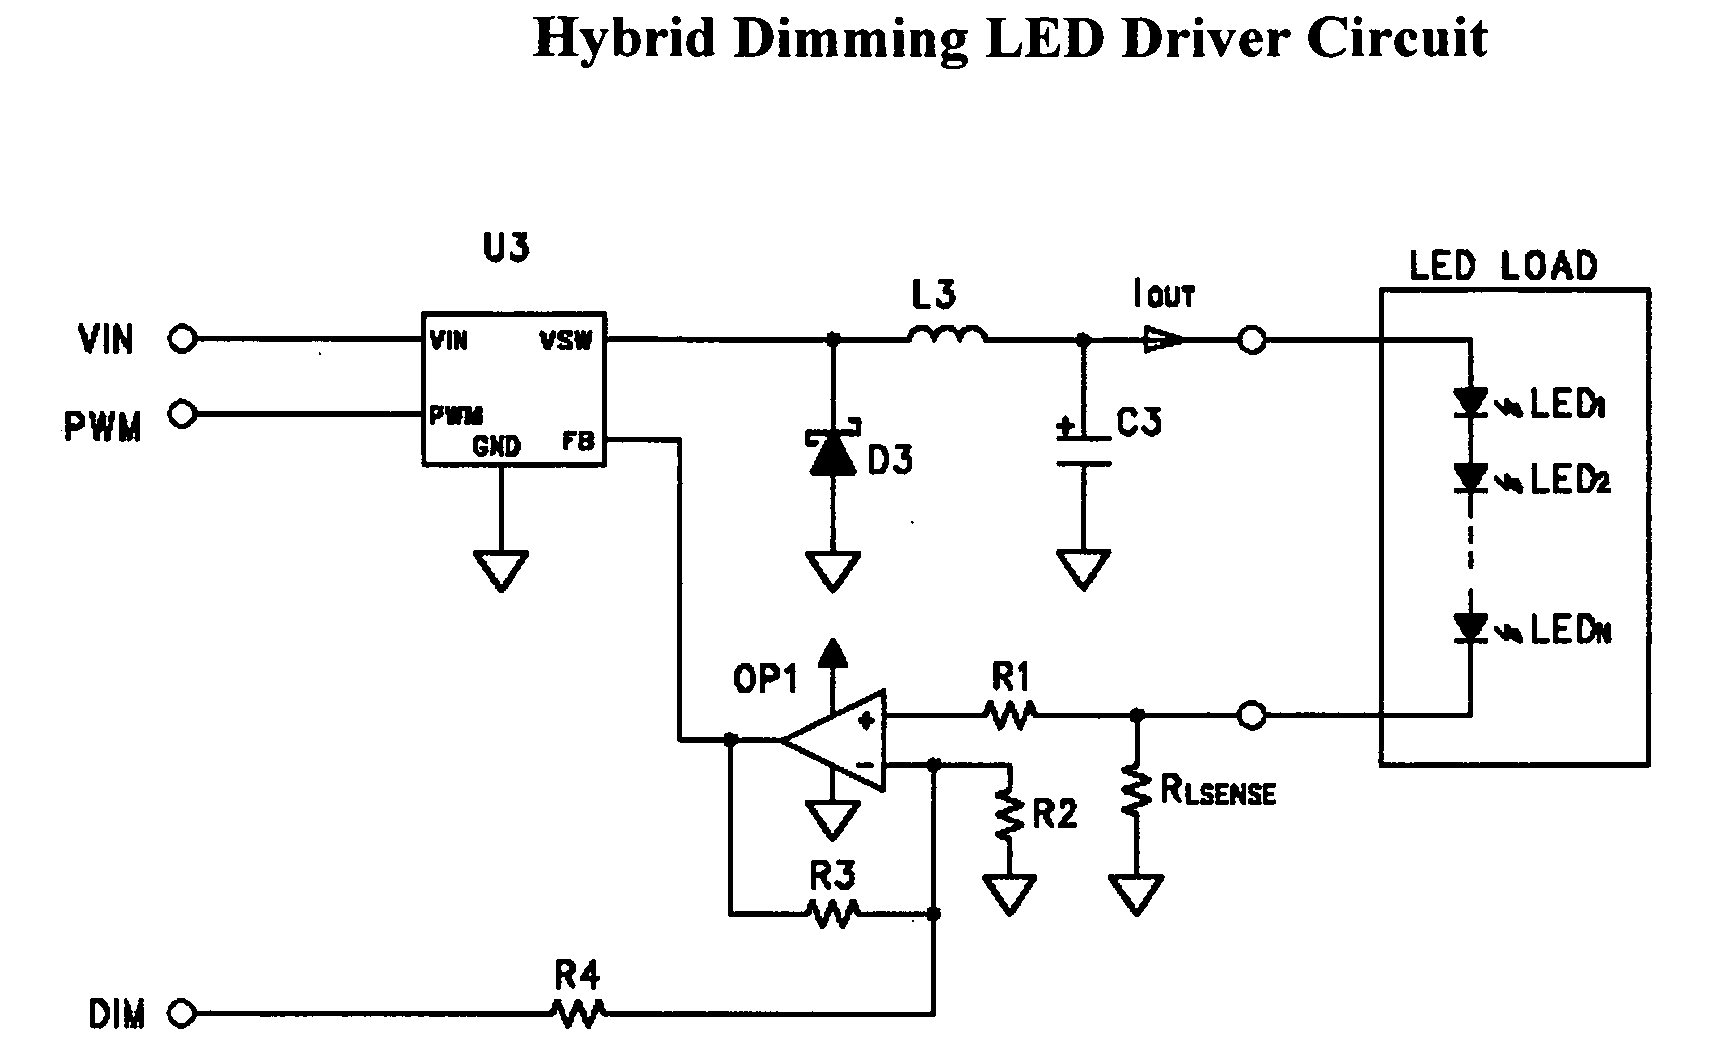 Hybrid-control current driver for dimming and color mixing in display and illumination systems